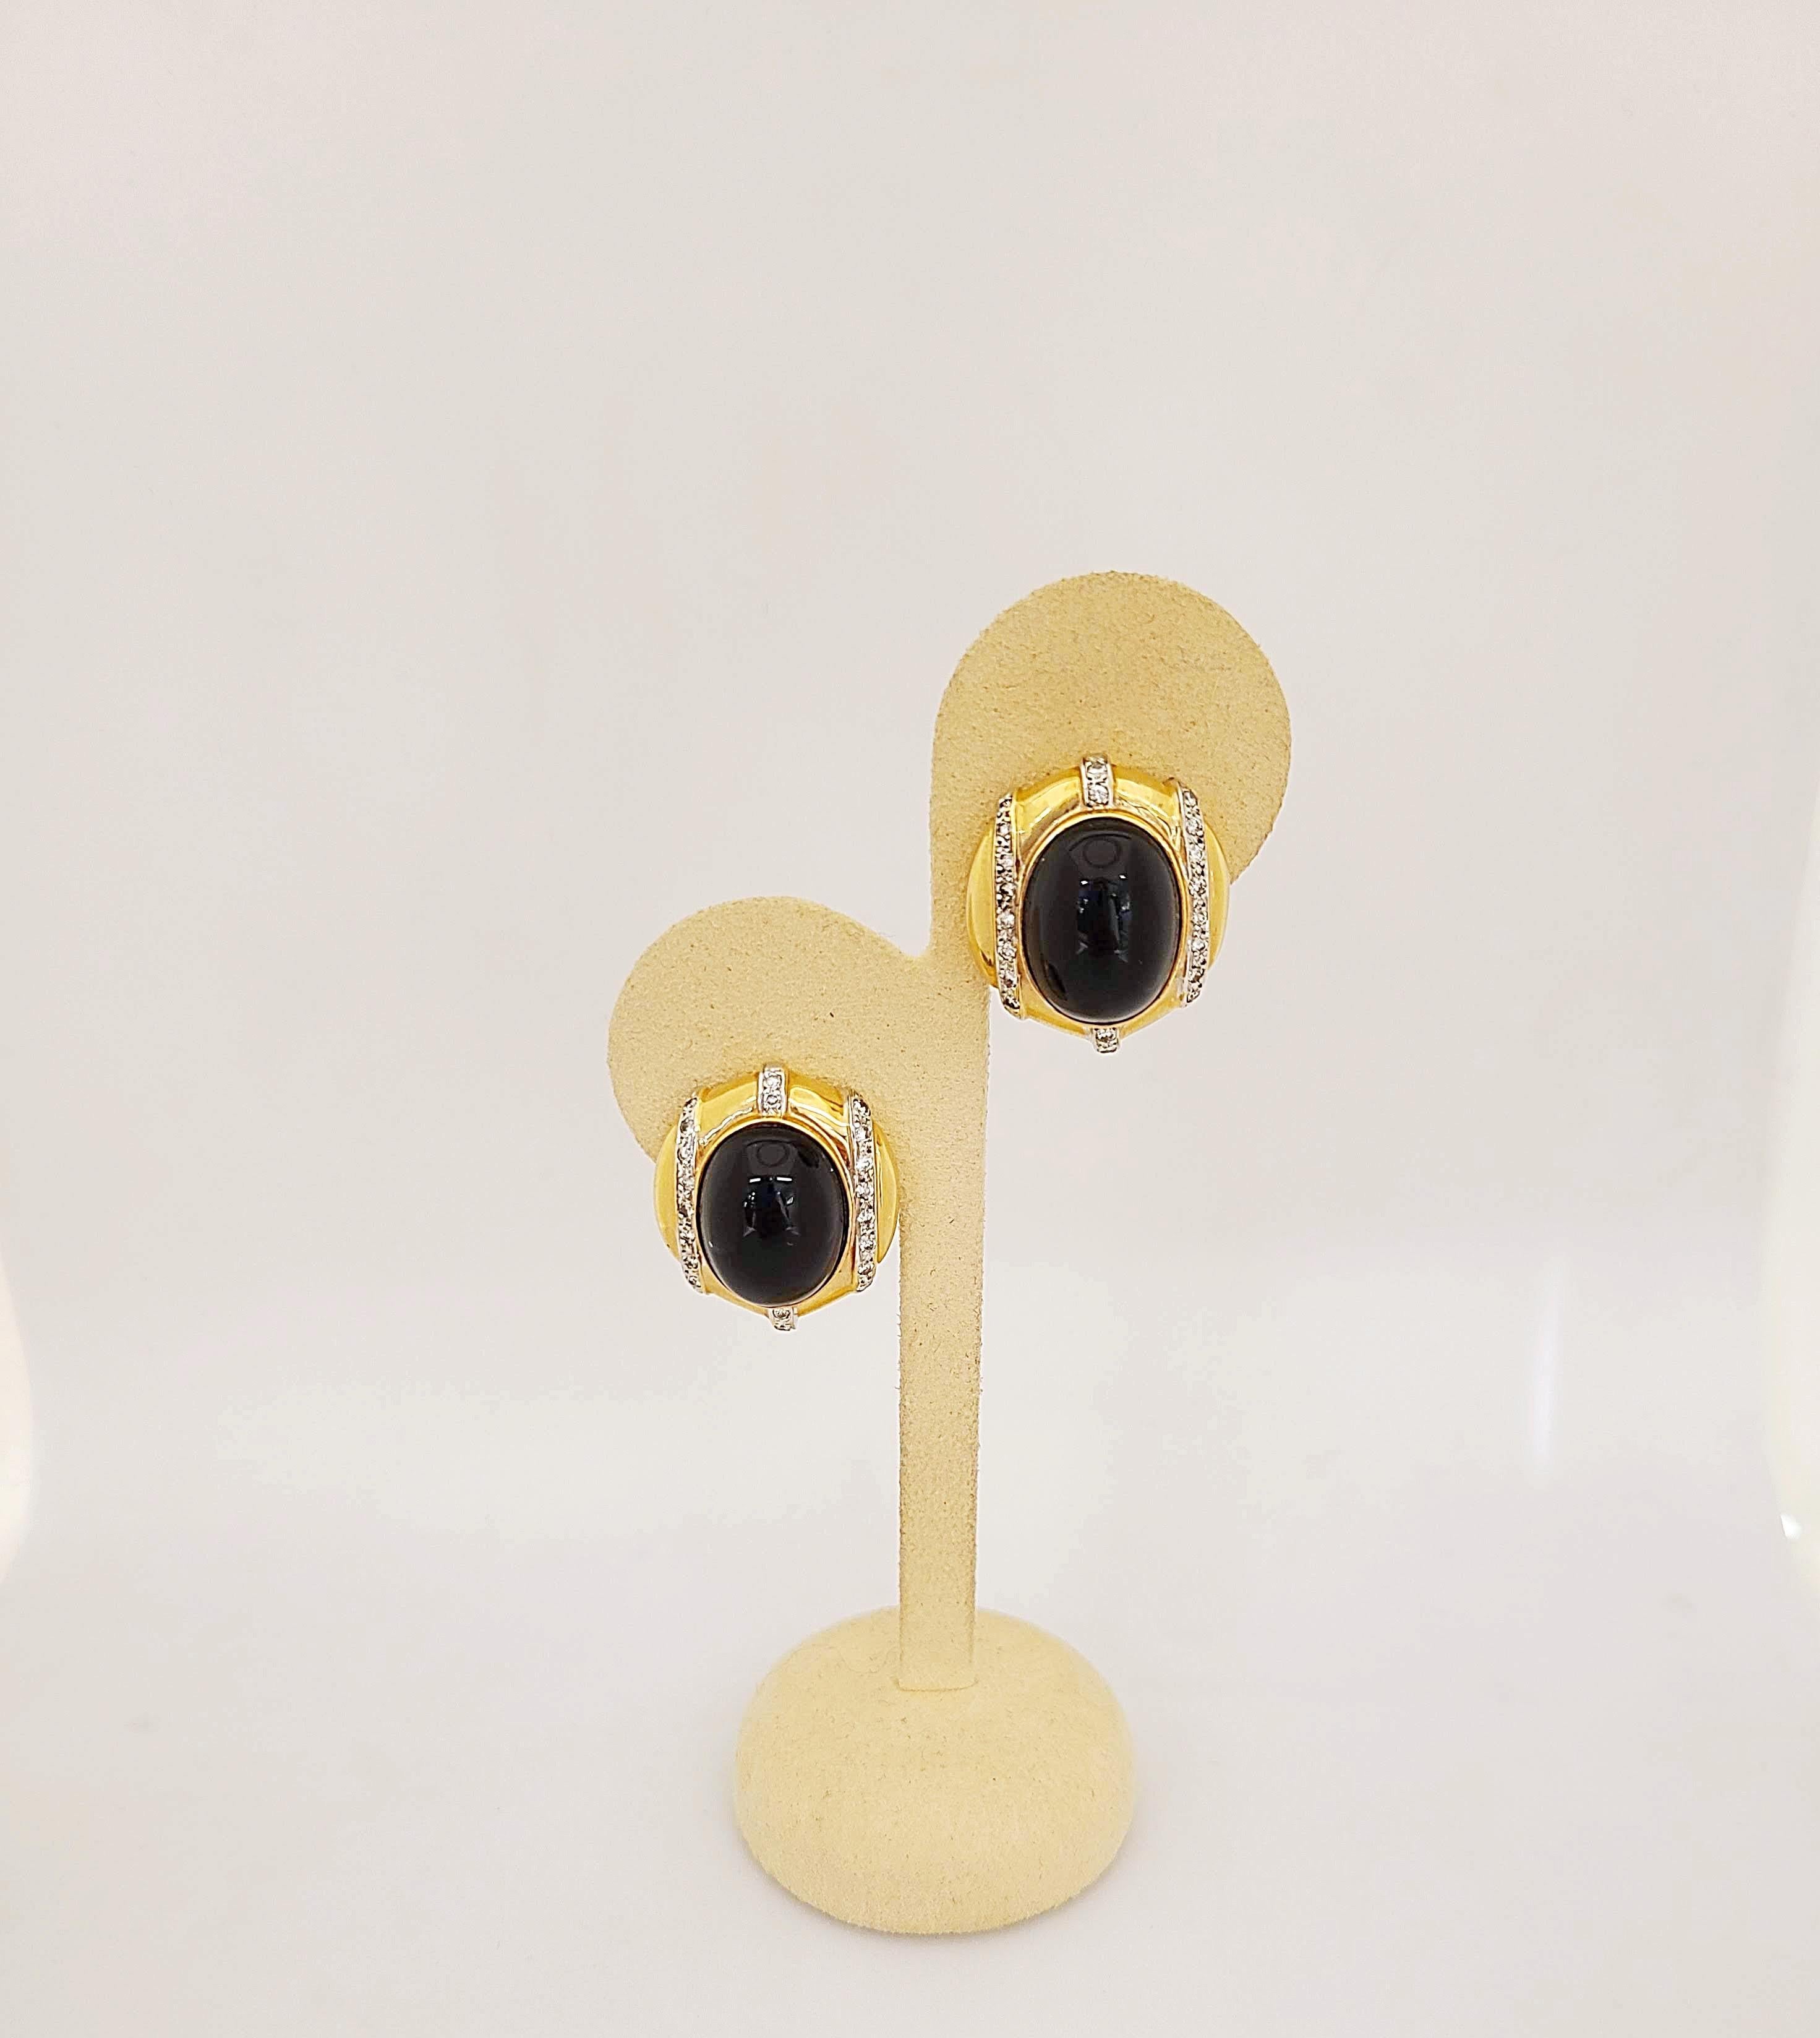 14 karat yellow gold earrings set with oval black onyx centers. Round brilliants diamonds set in white gold accent this lovely pair of button earrings. The earrings have post/omega backs.
Approximately 1